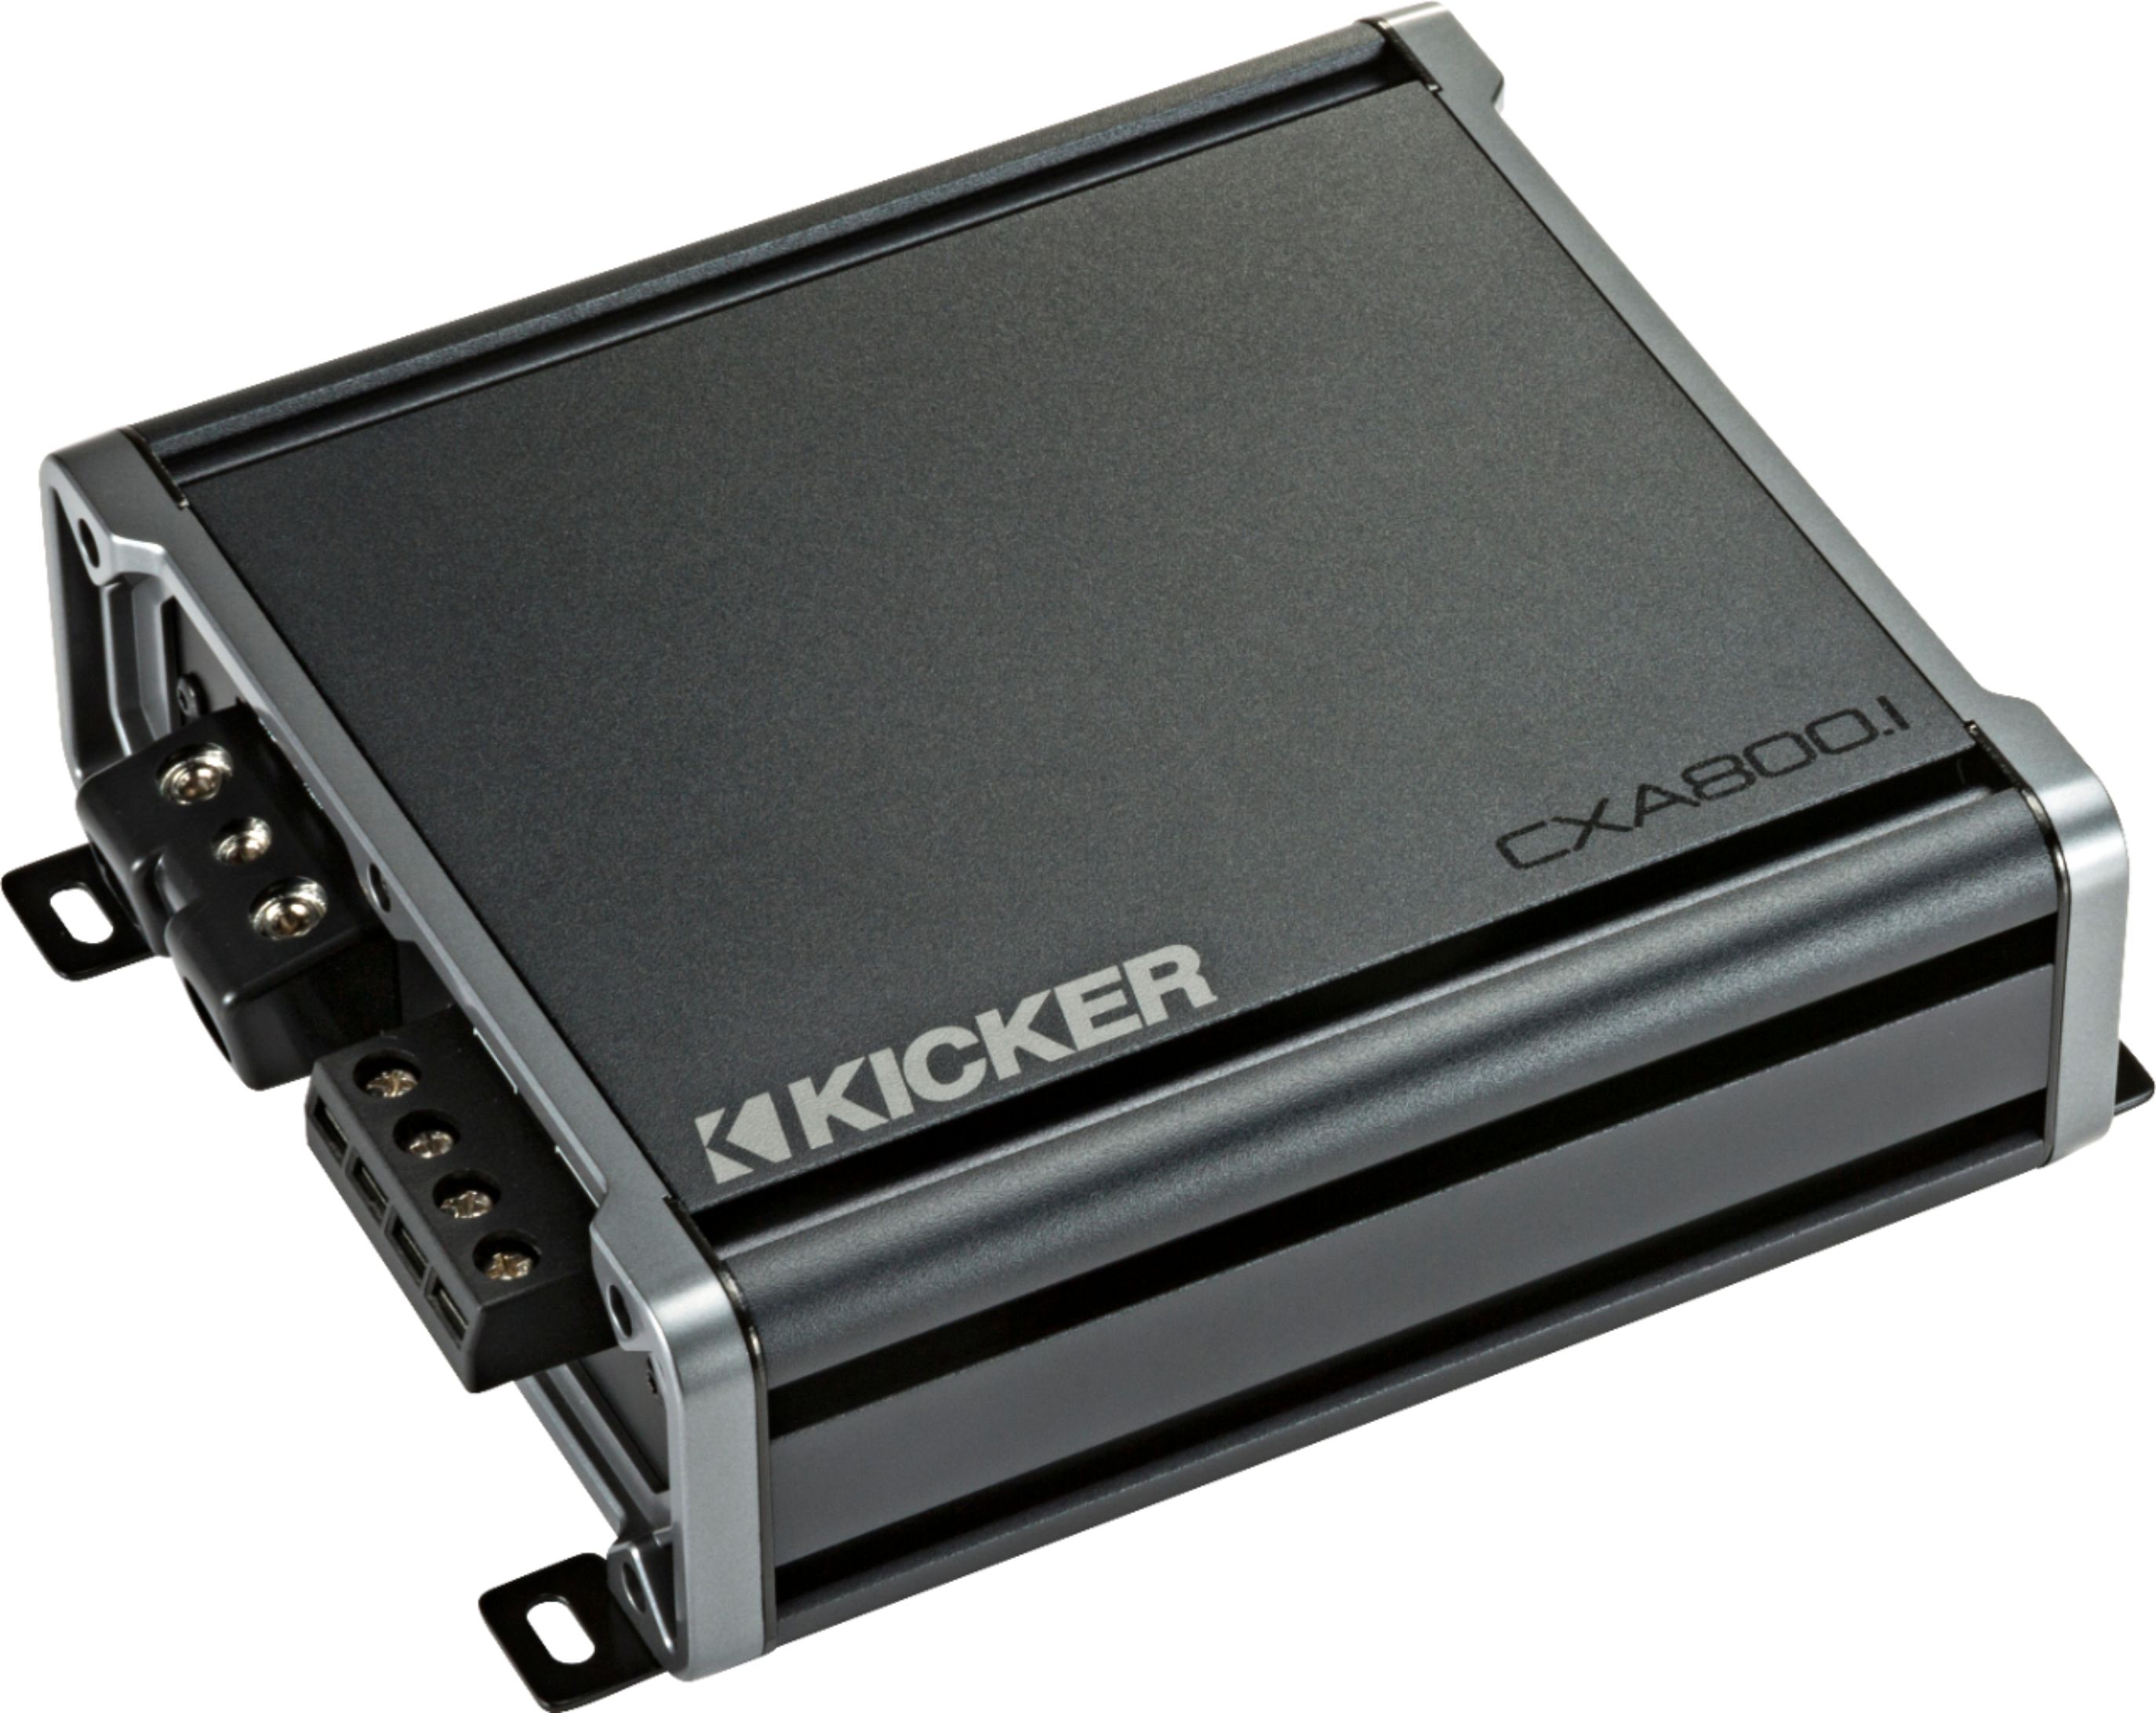 Angle View: KICKER - CX 800W Class D Digital Mono Amplifier with Variable Low-Pass Crossover - Gray